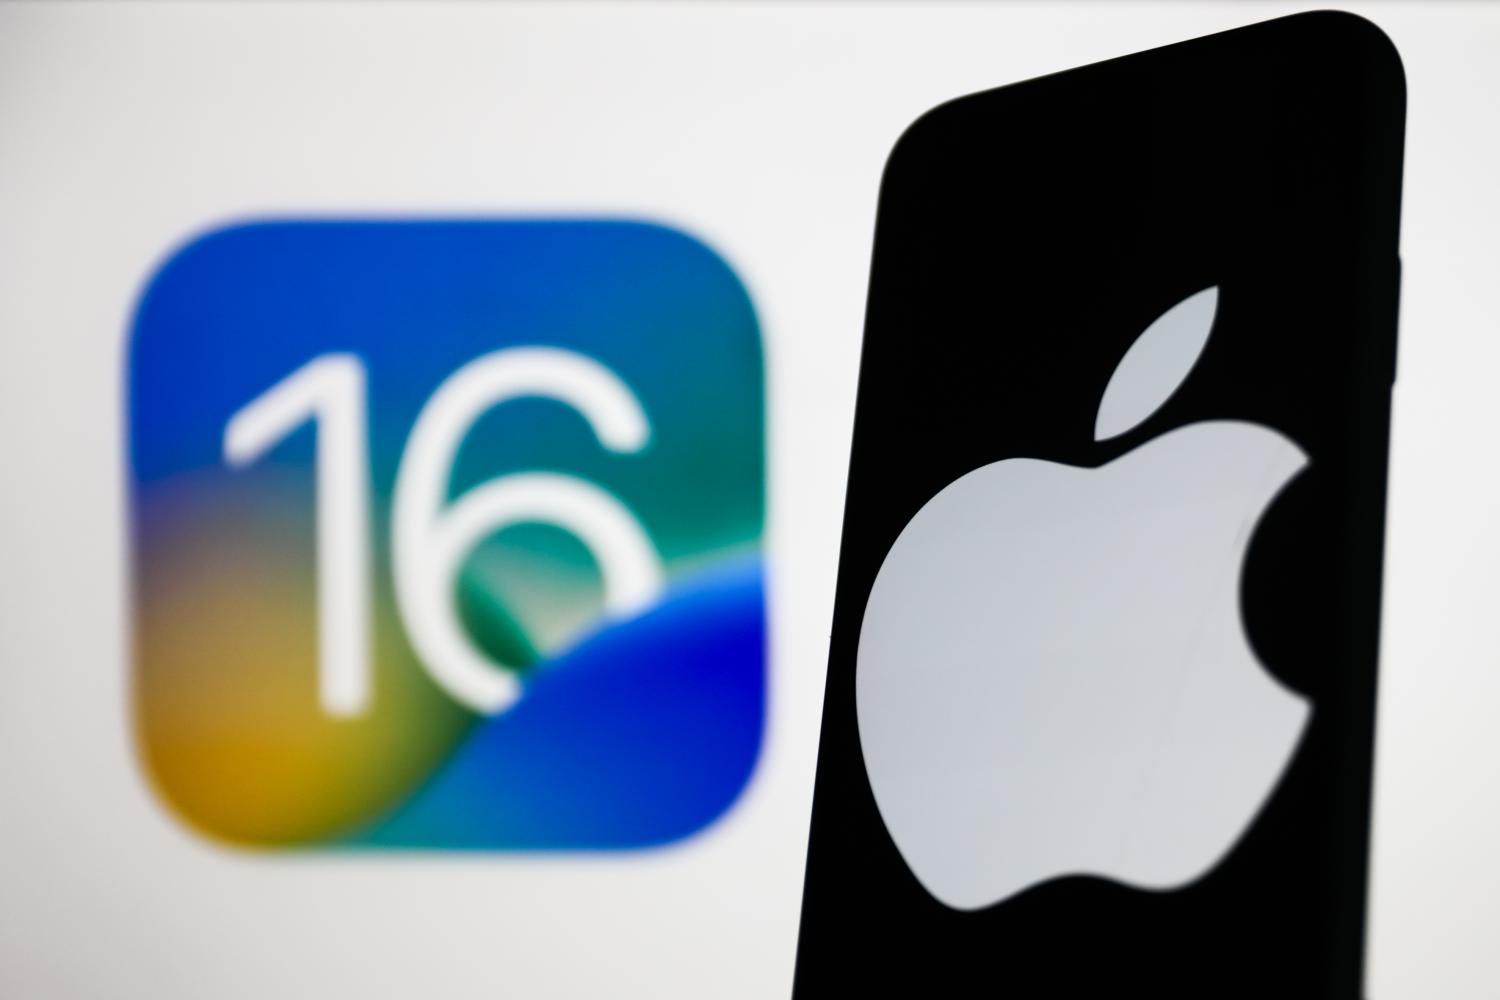 The tech giant touted new features and capabilities being built into the operating systems running iPhone, Apple Watch and more.